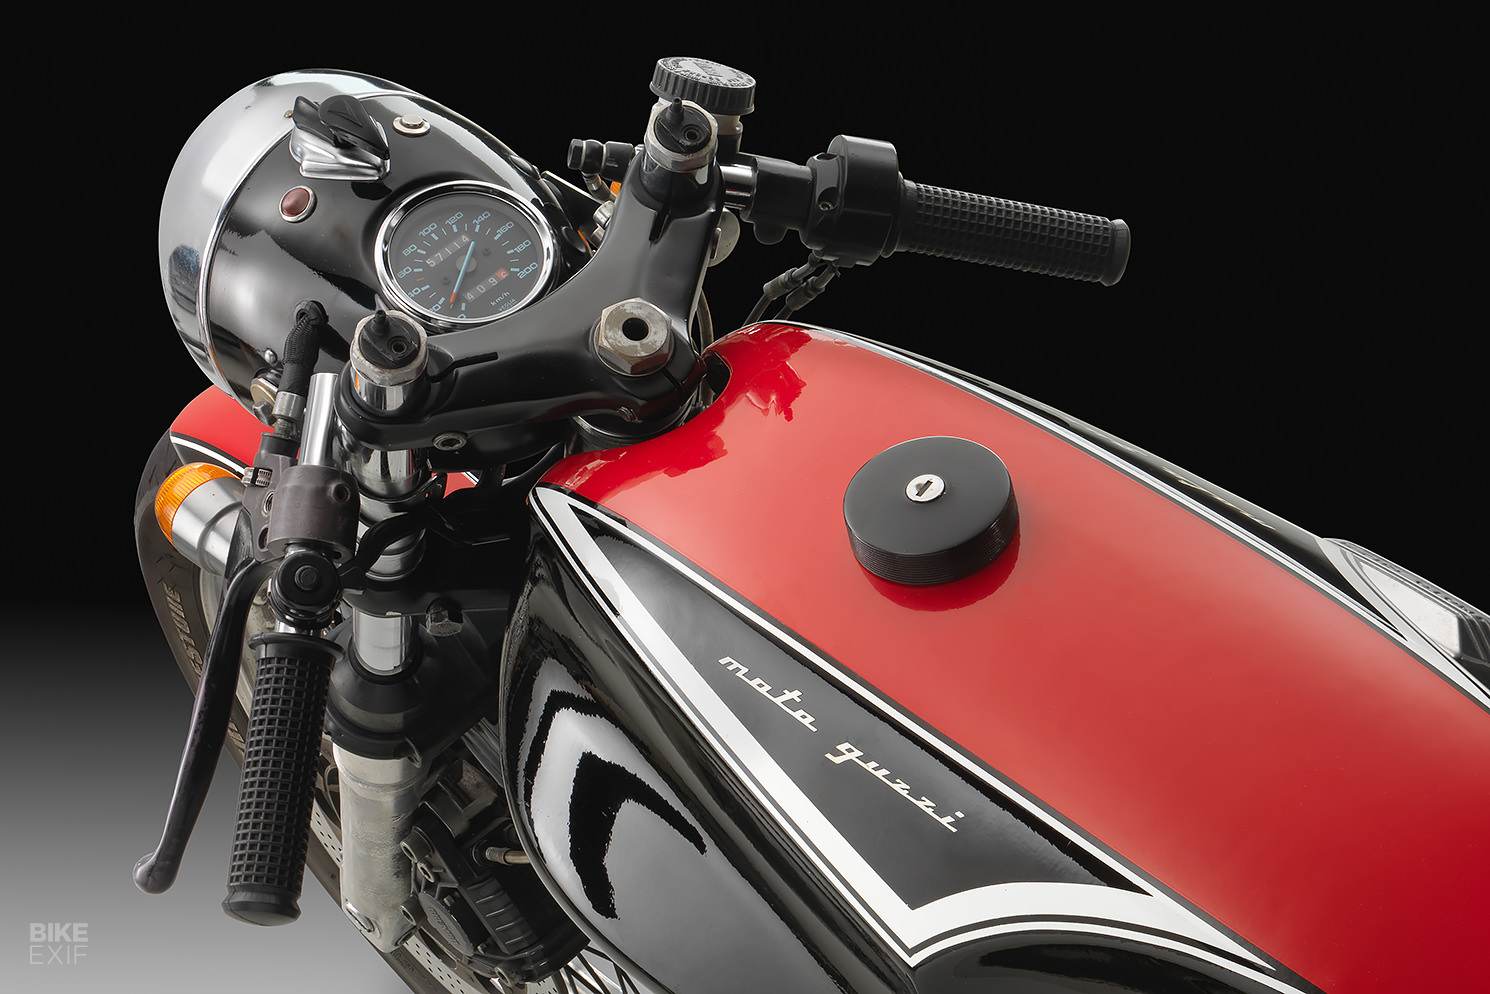 Moto Guzzi Le Mans cafe racer by Sewy Motorcycles